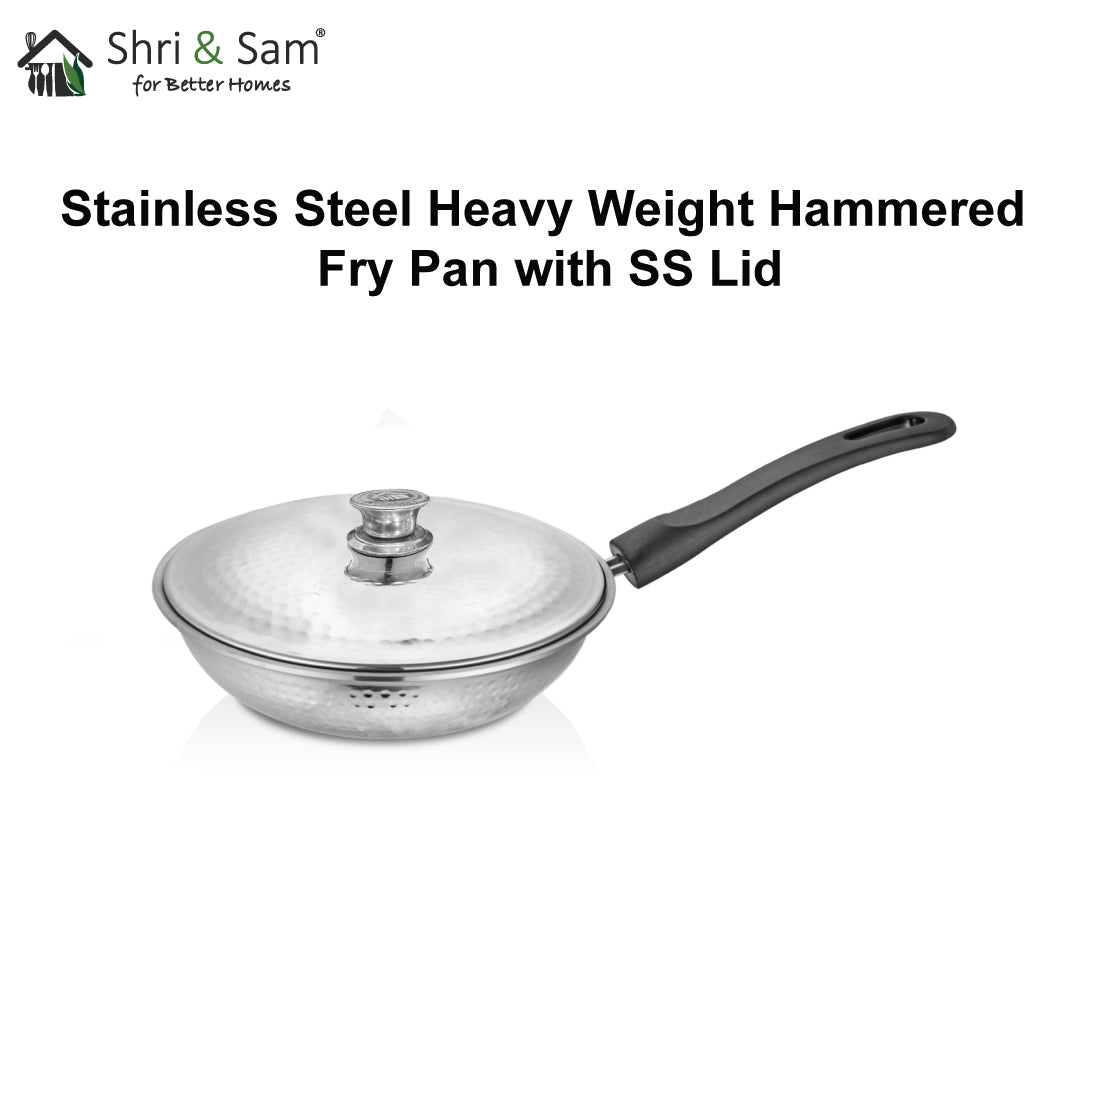 Stainless Steel Heavy Weight Hammered Fry Pan with SS Lid